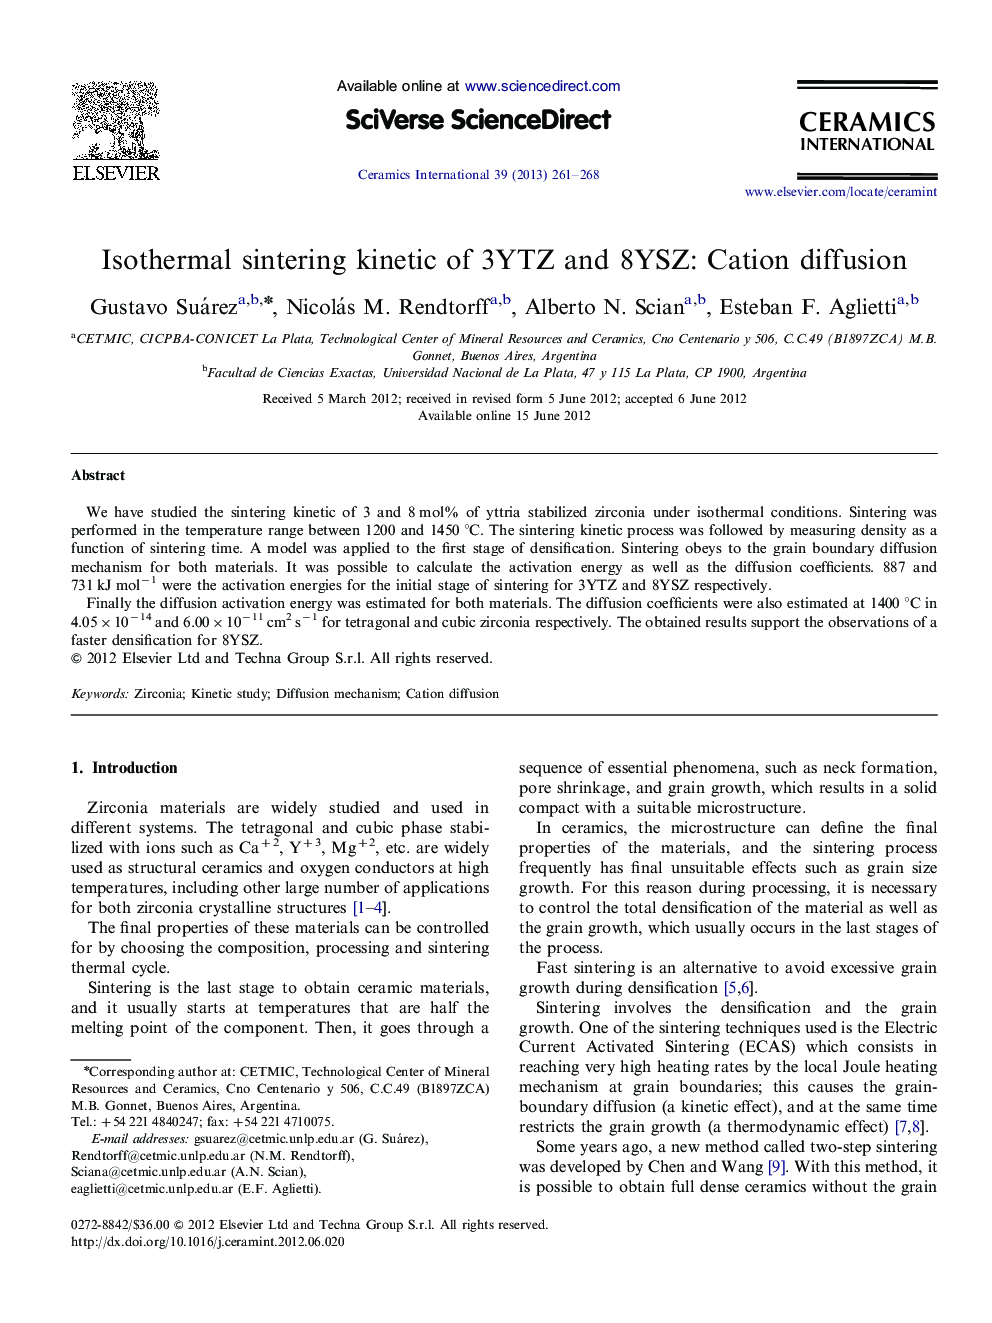 Isothermal sintering kinetic of 3YTZ and 8YSZ: Cation diffusion